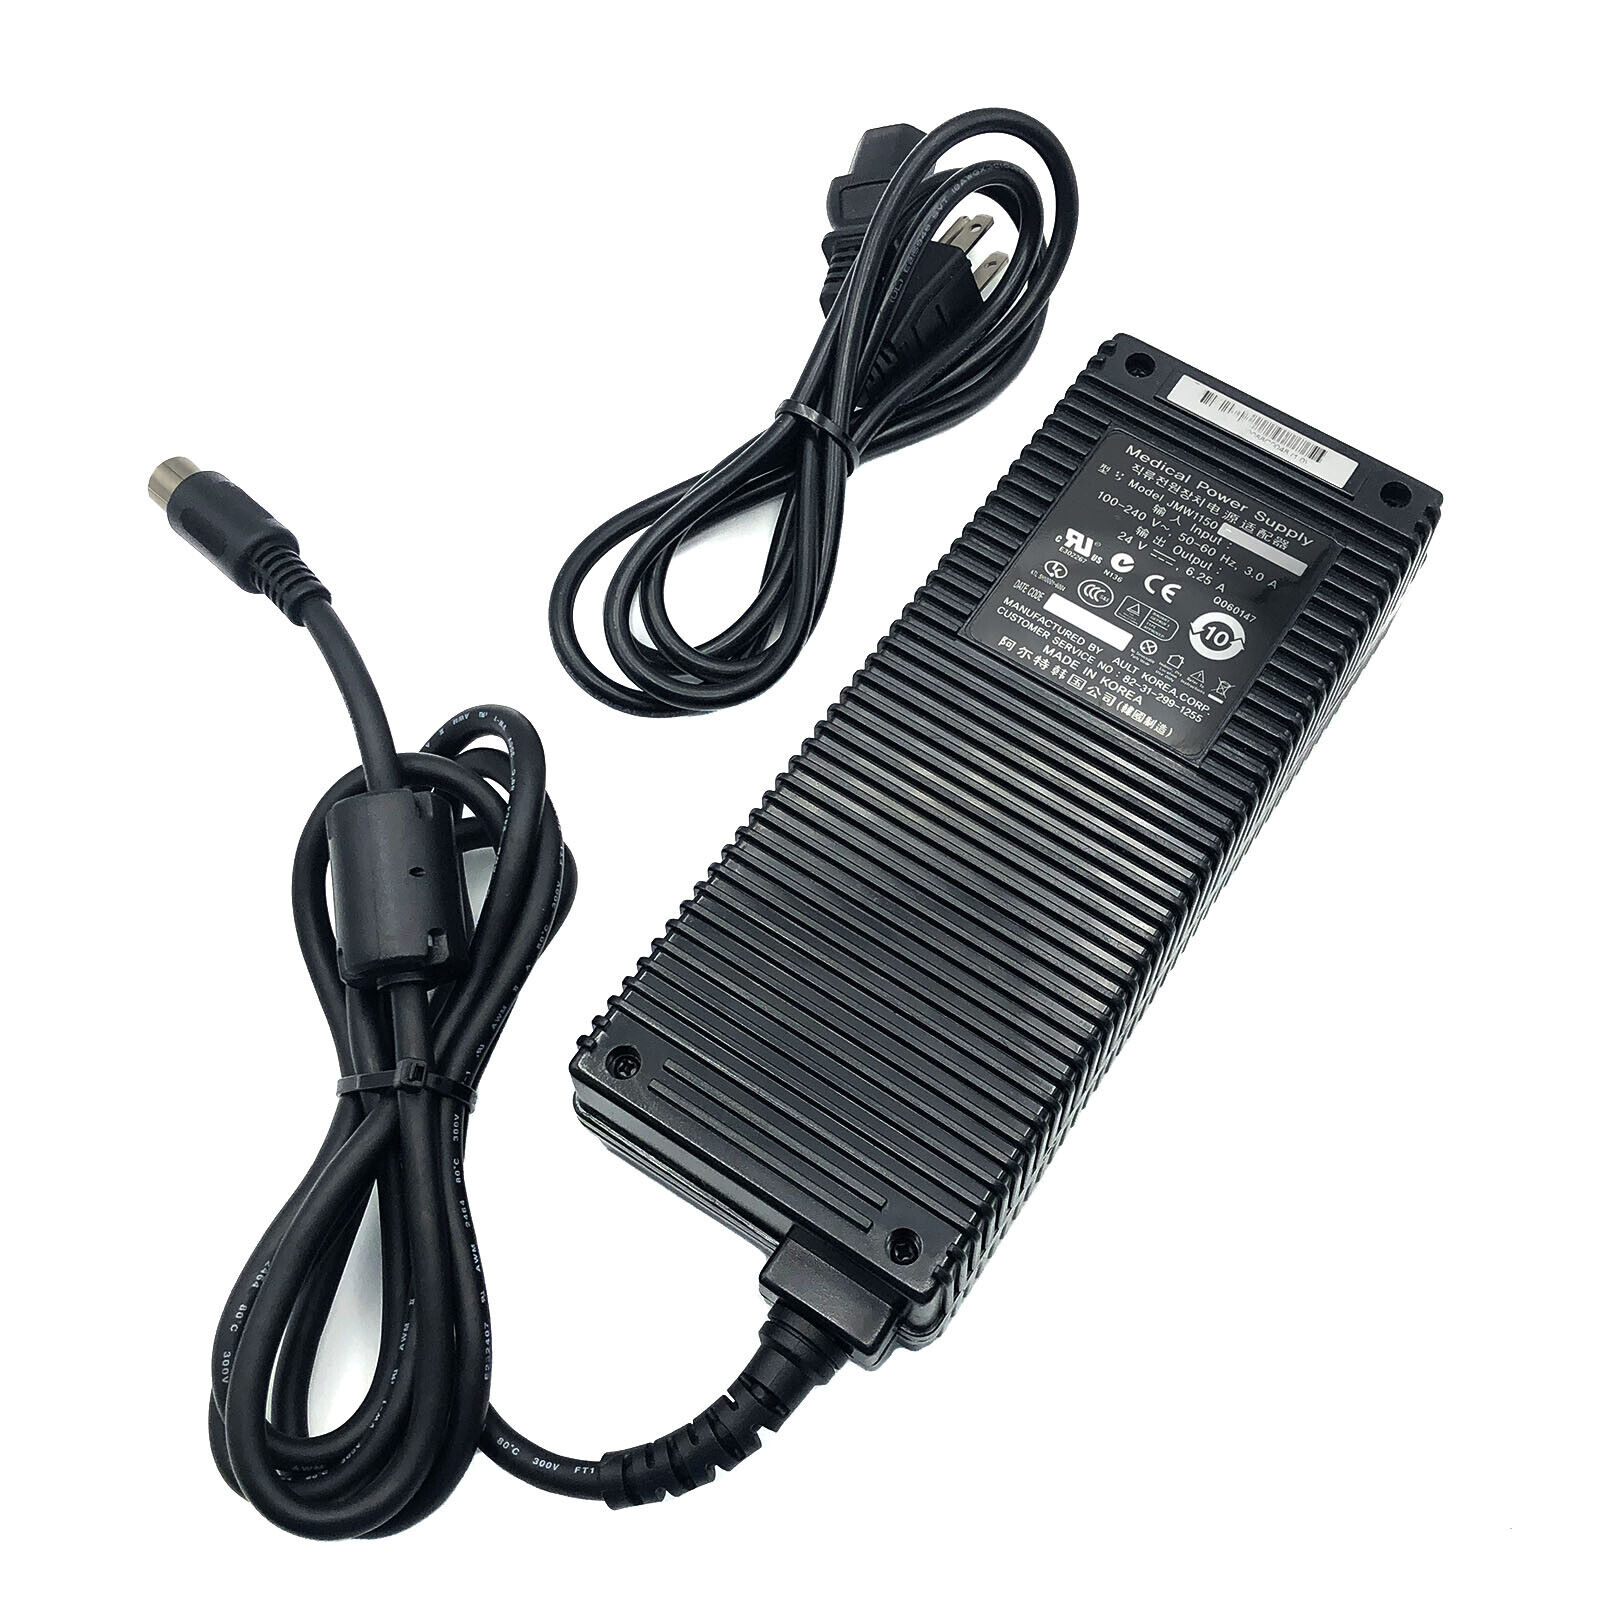 *Brand NEW*Ault 24V 6.25A AC Adapter Medical Power Supply JMW1150 6-Pin w/Cord